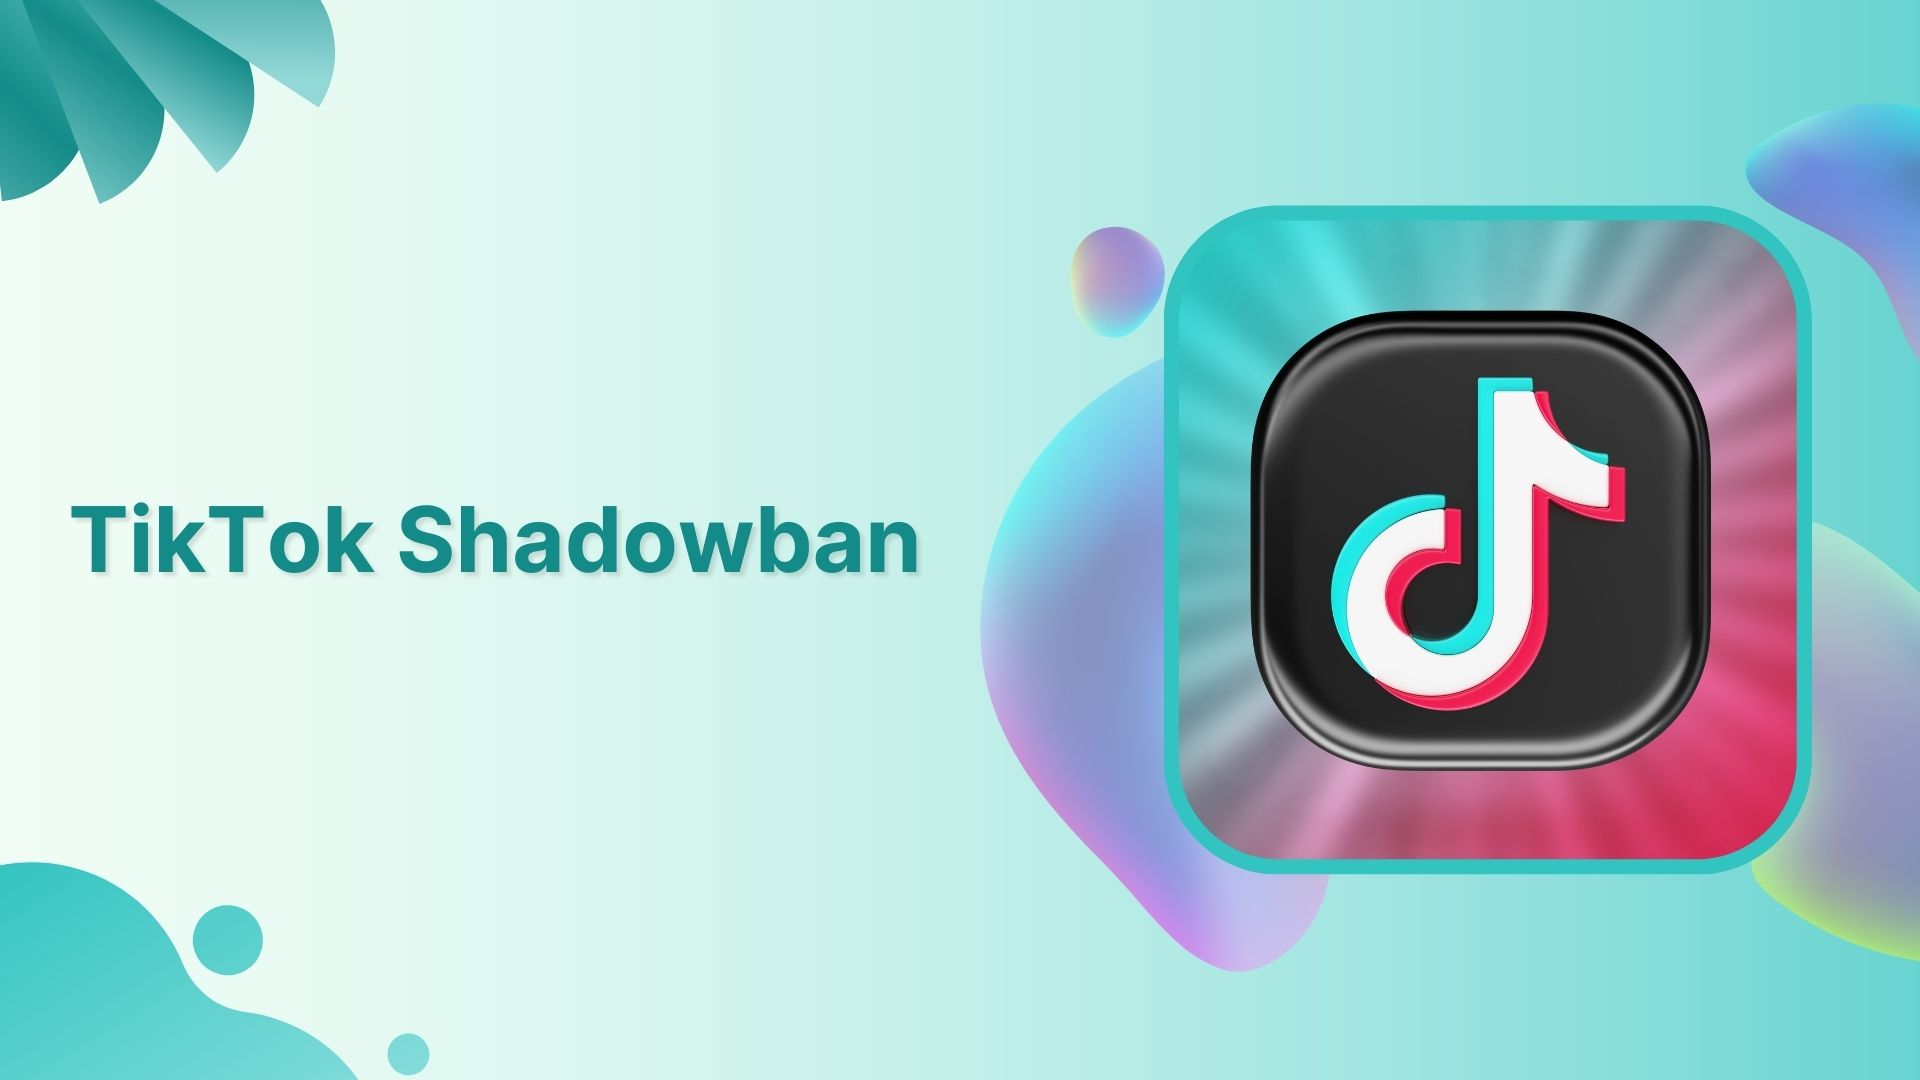 TikTok Shadow Ban: All You Need to Know